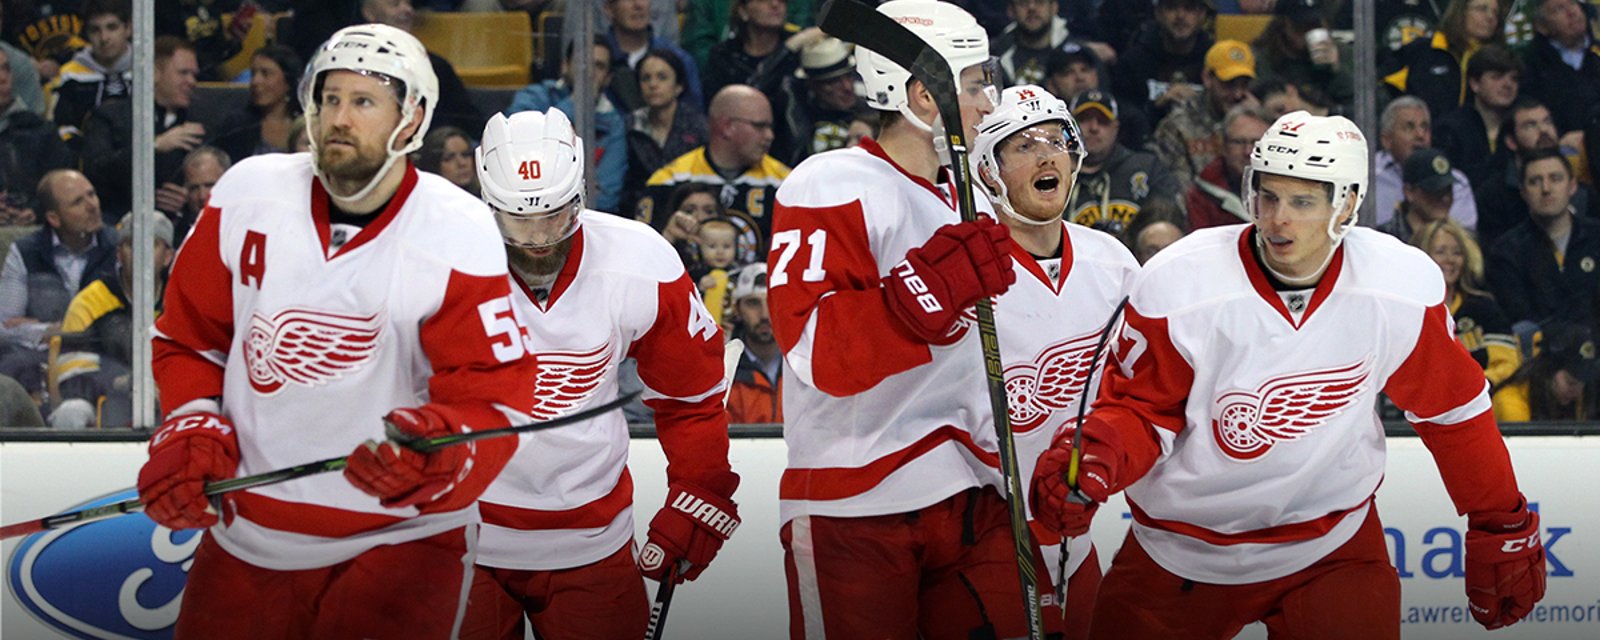 Your Call: Who will bounce back? Larkin or Nyquist?